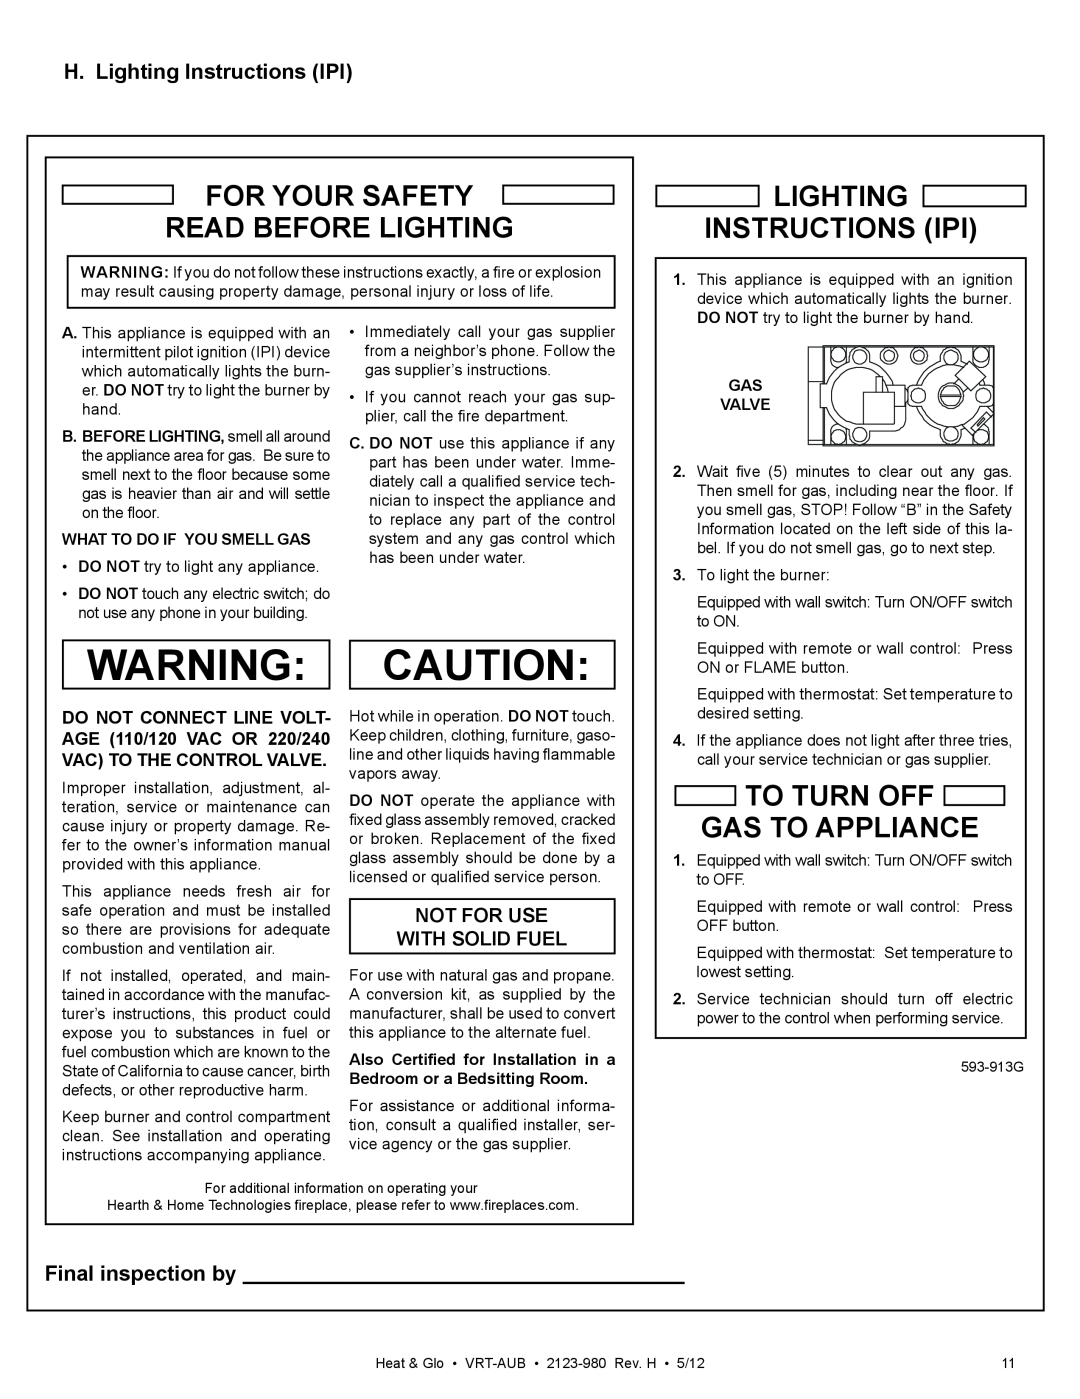 Heat & Glo LifeStyle VRT-BZ-N-AUB For Your Safety Read Before Lighting, Lighting Instructions Ipi, Final inspection by 